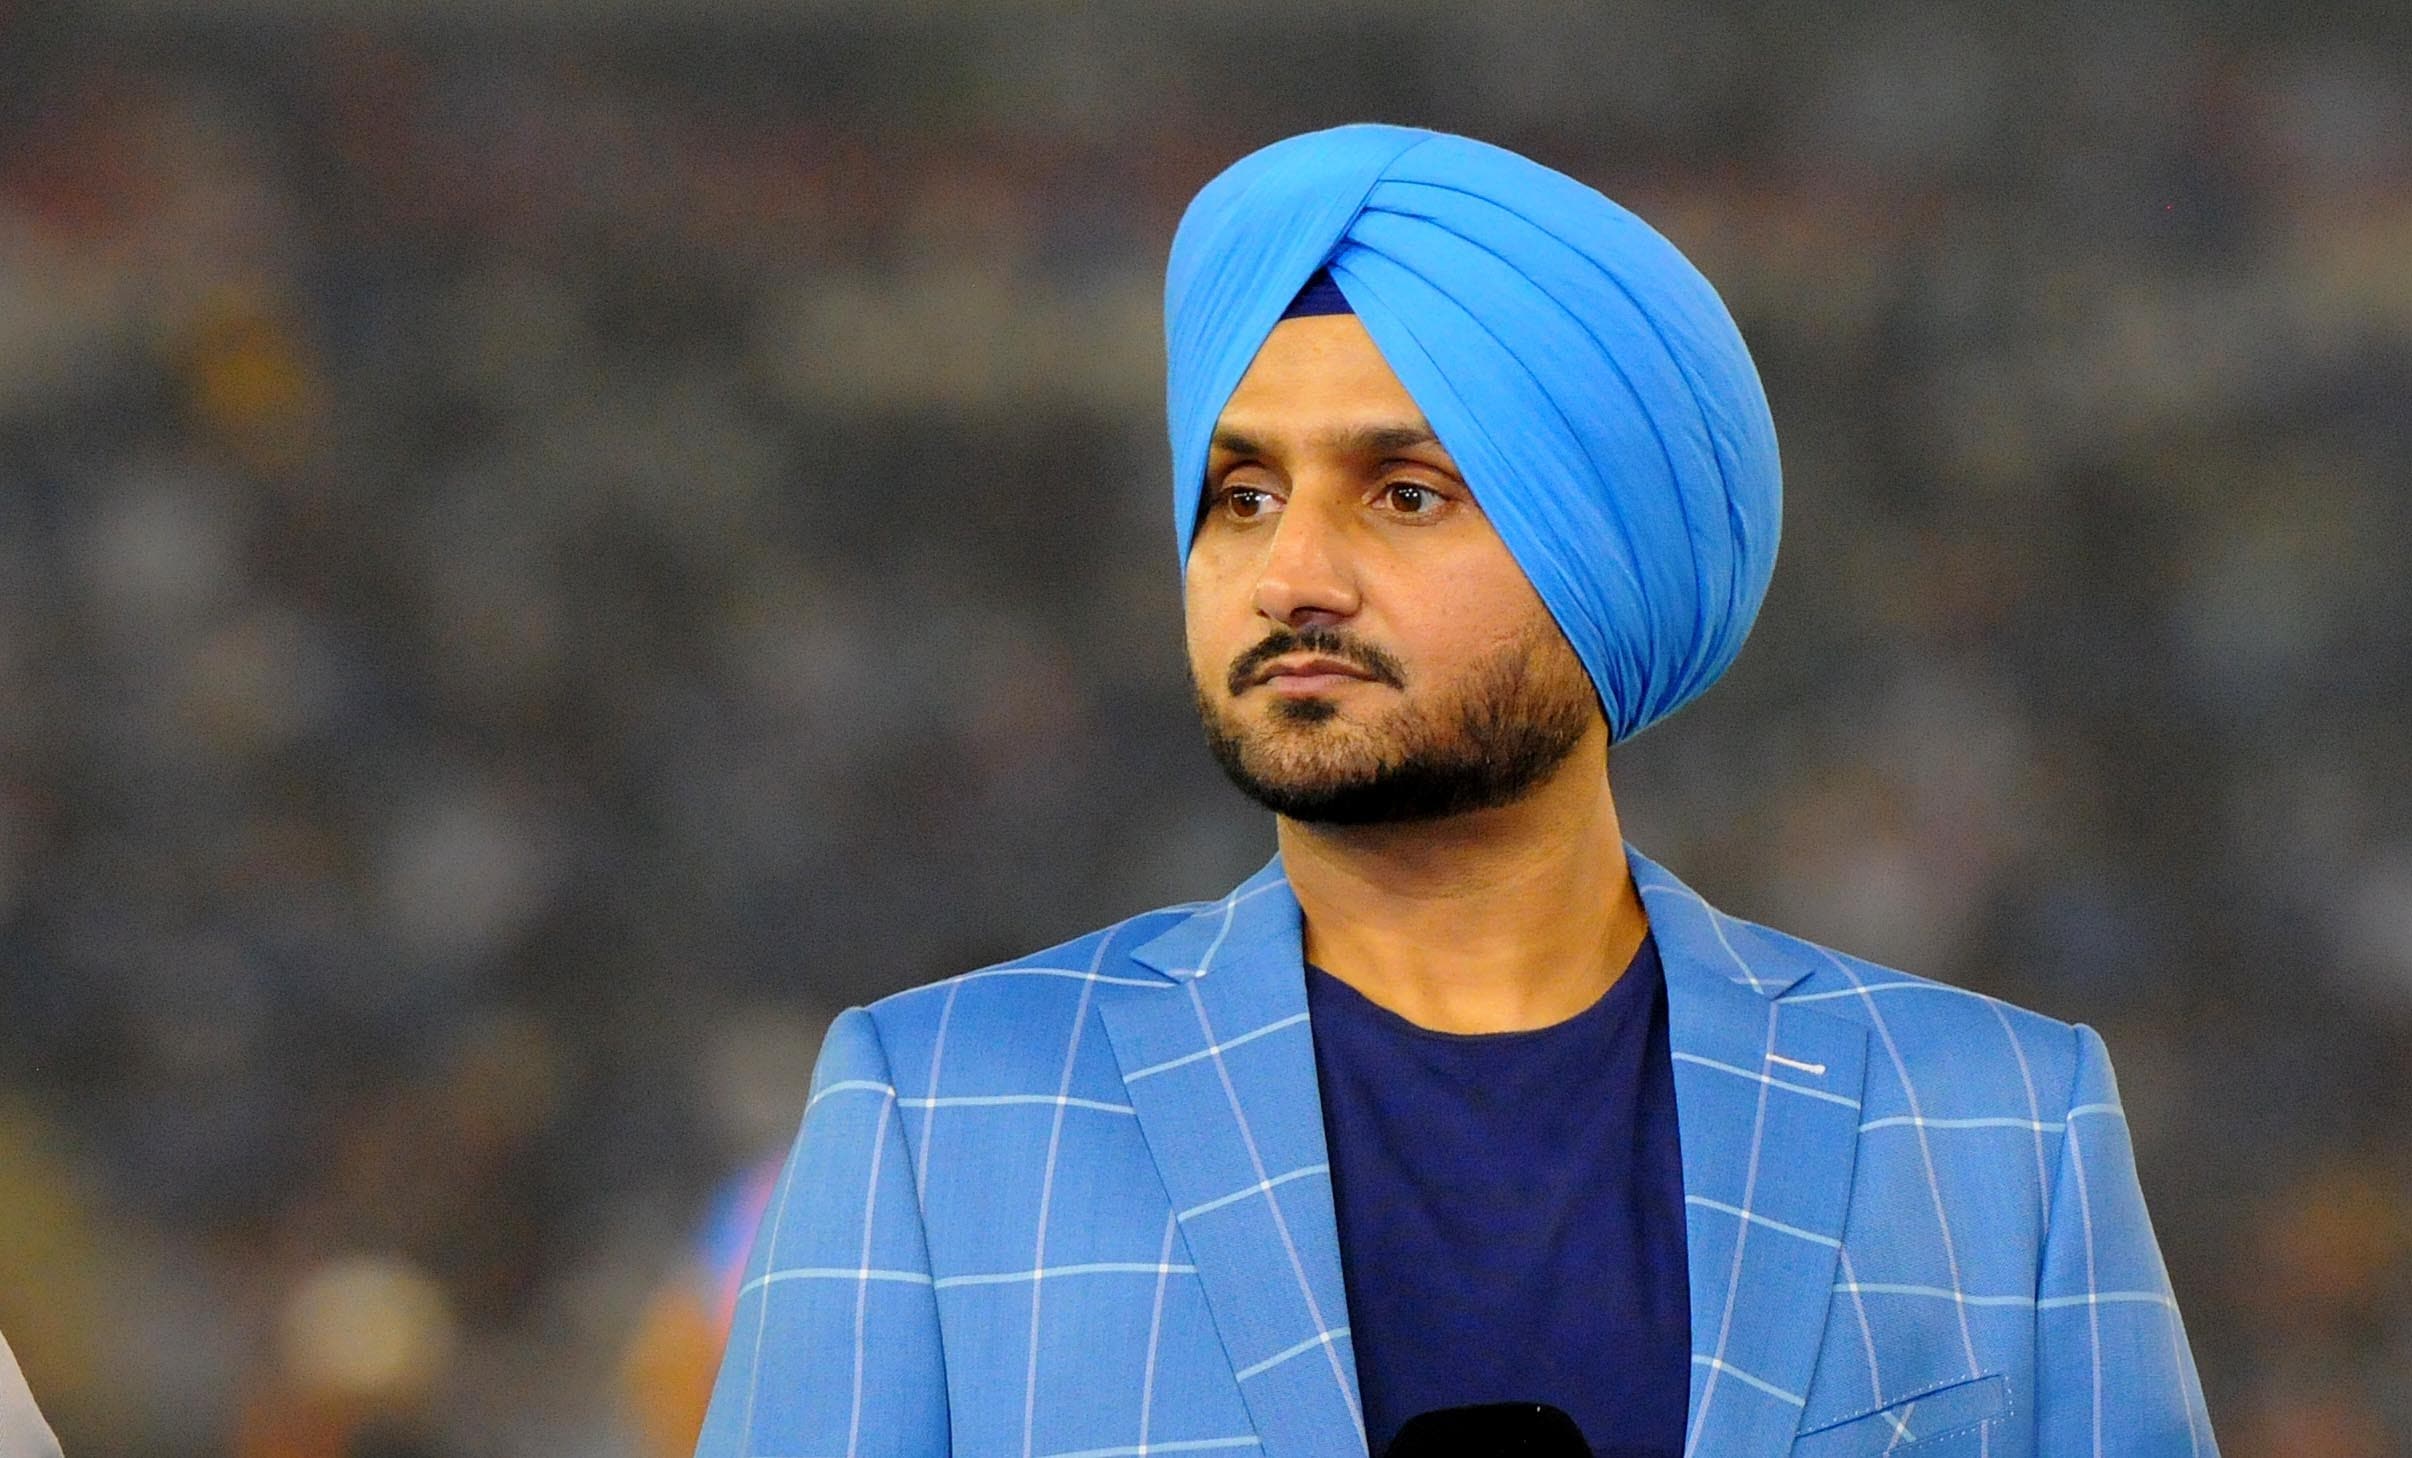 Former Indian cricketer Harbhajan Singh stresses that “one can judge a sportsperson on their performance, but the decision to play or not play is the player’s own” (Photo: Keshav Singh/HT)